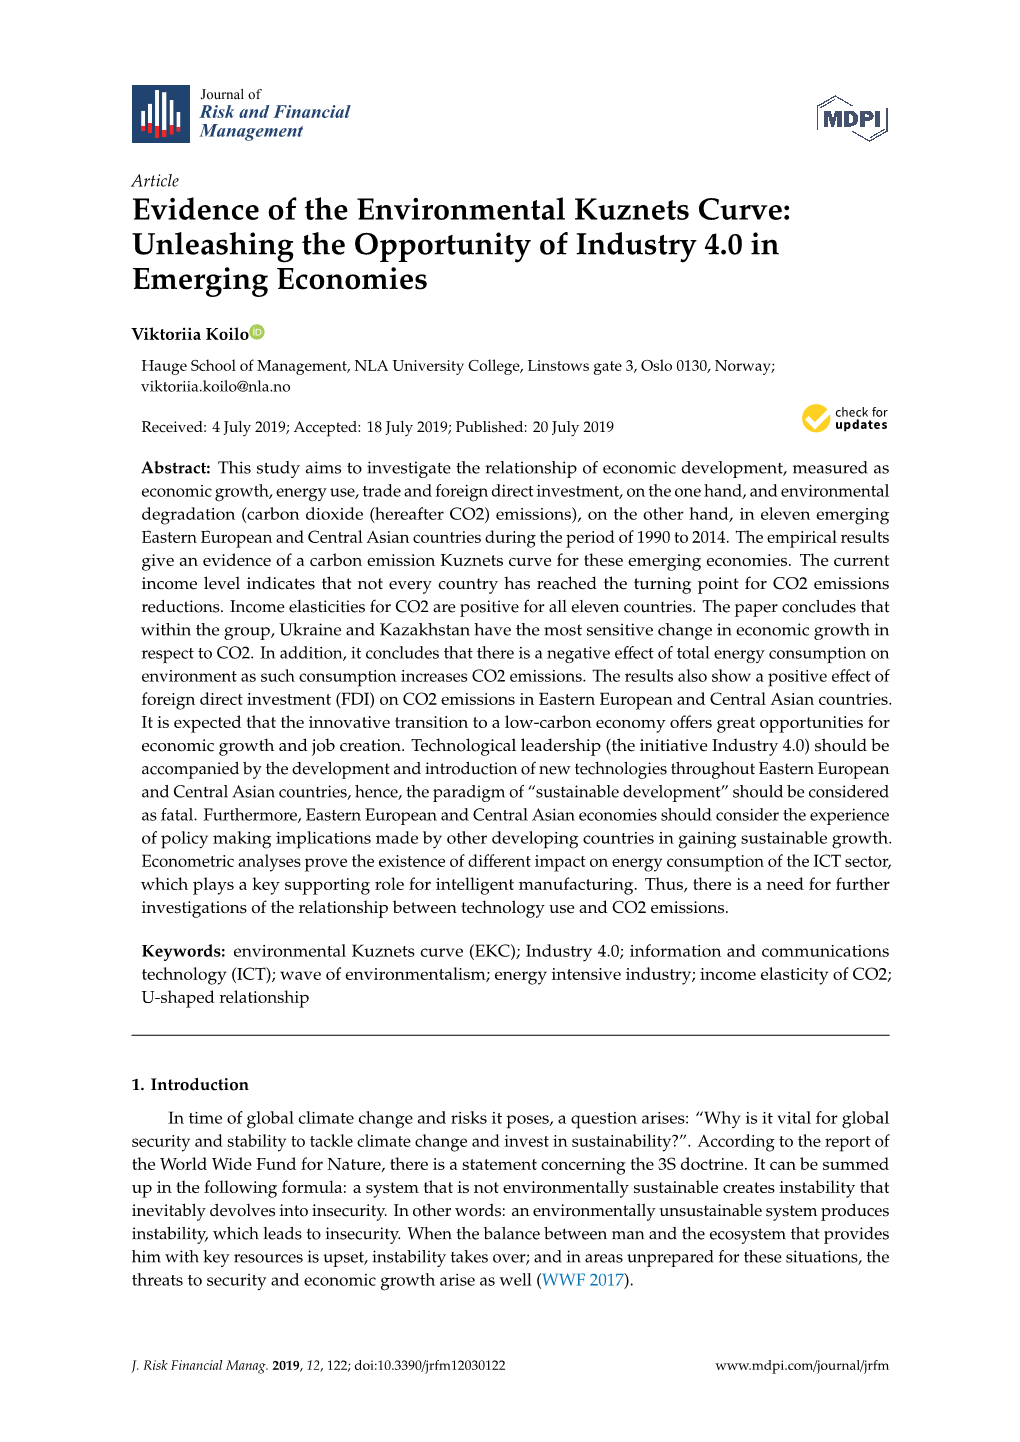 Evidence of the Environmental Kuznets Curve: Unleashing the Opportunity of Industry 4.0 in Emerging Economies